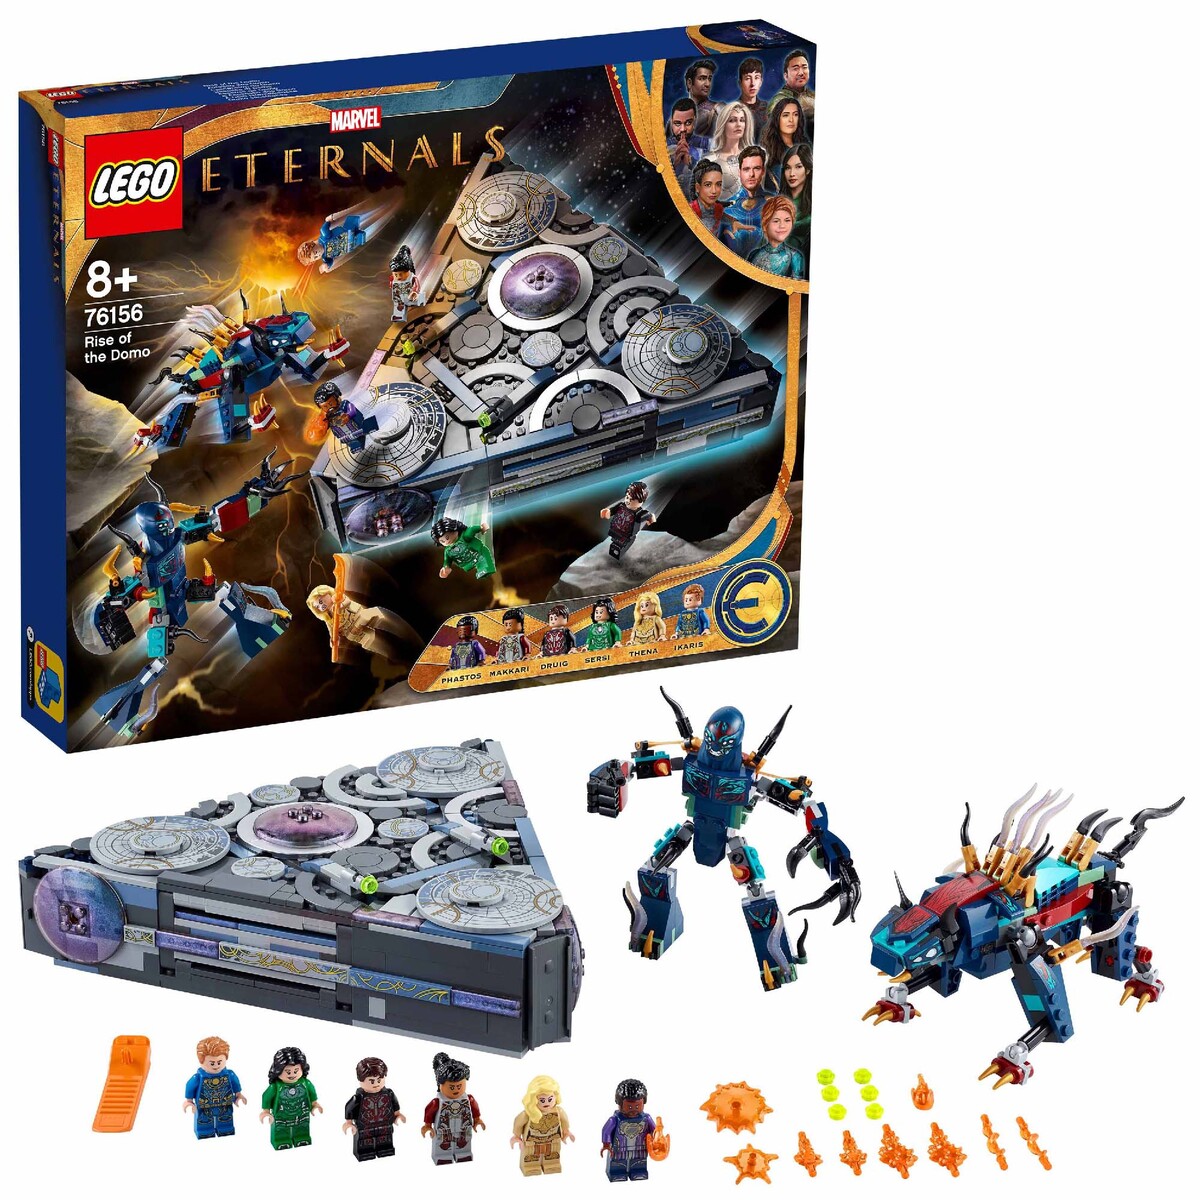 Lego Rise of the Domo 76156